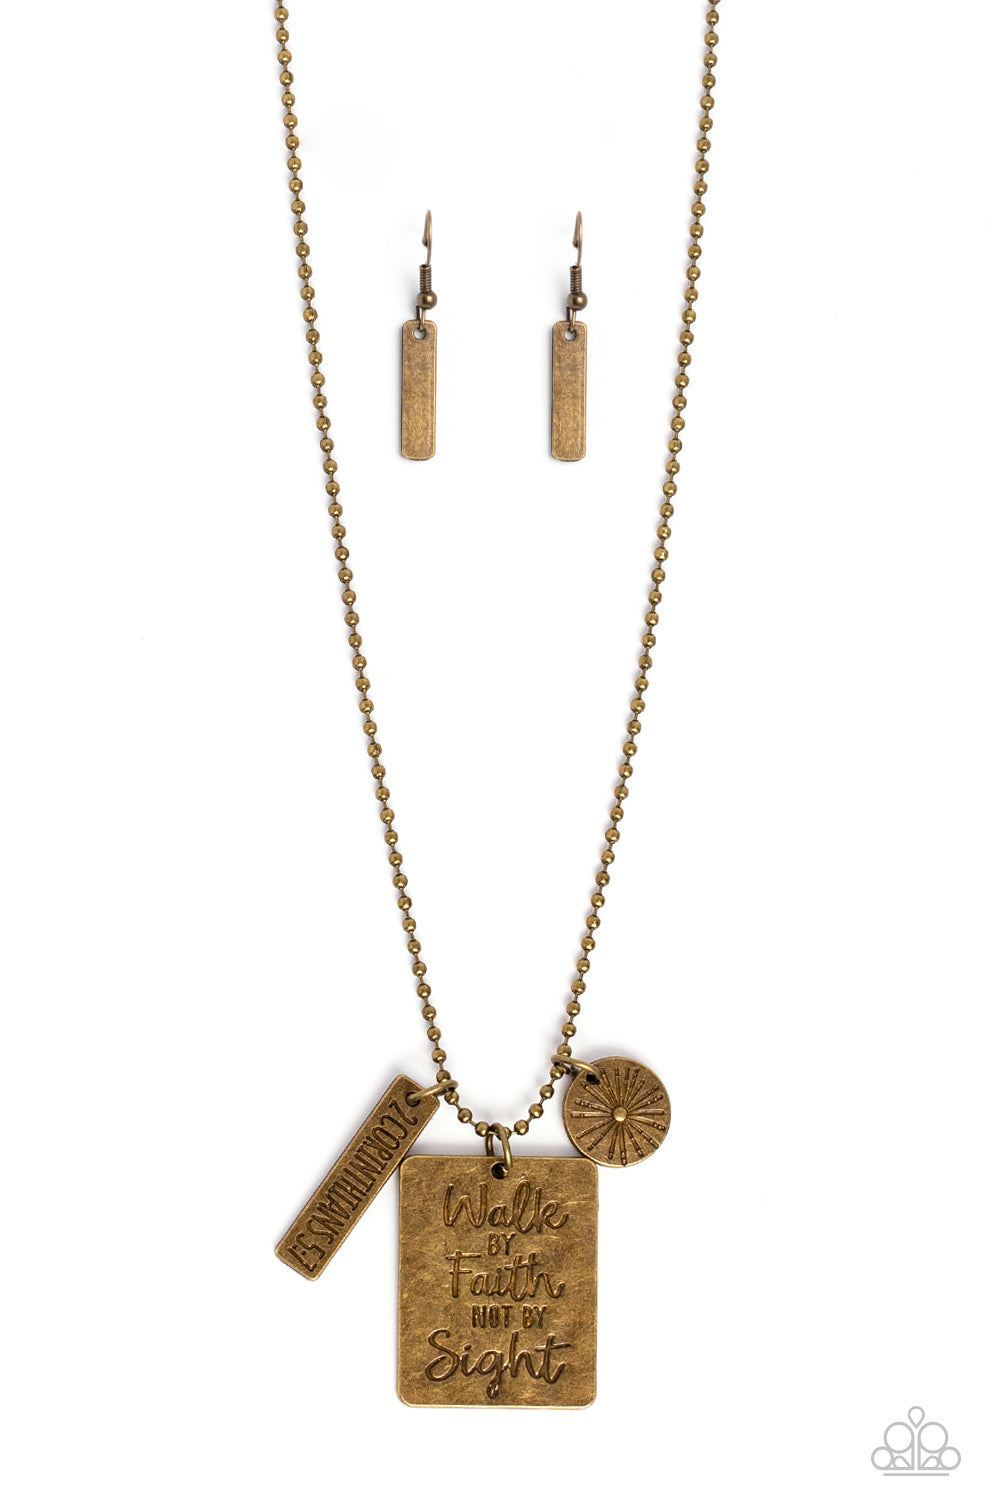 Sunshine Sight Brass Inspirational Necklace - Paparazzi Accessories  Hanging from a brass ball chain, a gritty collection of a rectangular plate dangles next to a disc featuring a sun, and a bar stamped with the Bible reference "2 Corinthians 5:7". The three dangling brass shapes add eye-catching movement to the inspired design. Prominently stamped on the rectangular pendant, the words "Walk by Faith not by Sight" stand out for a faith-filled finish. Includes one pair of matching earrings.